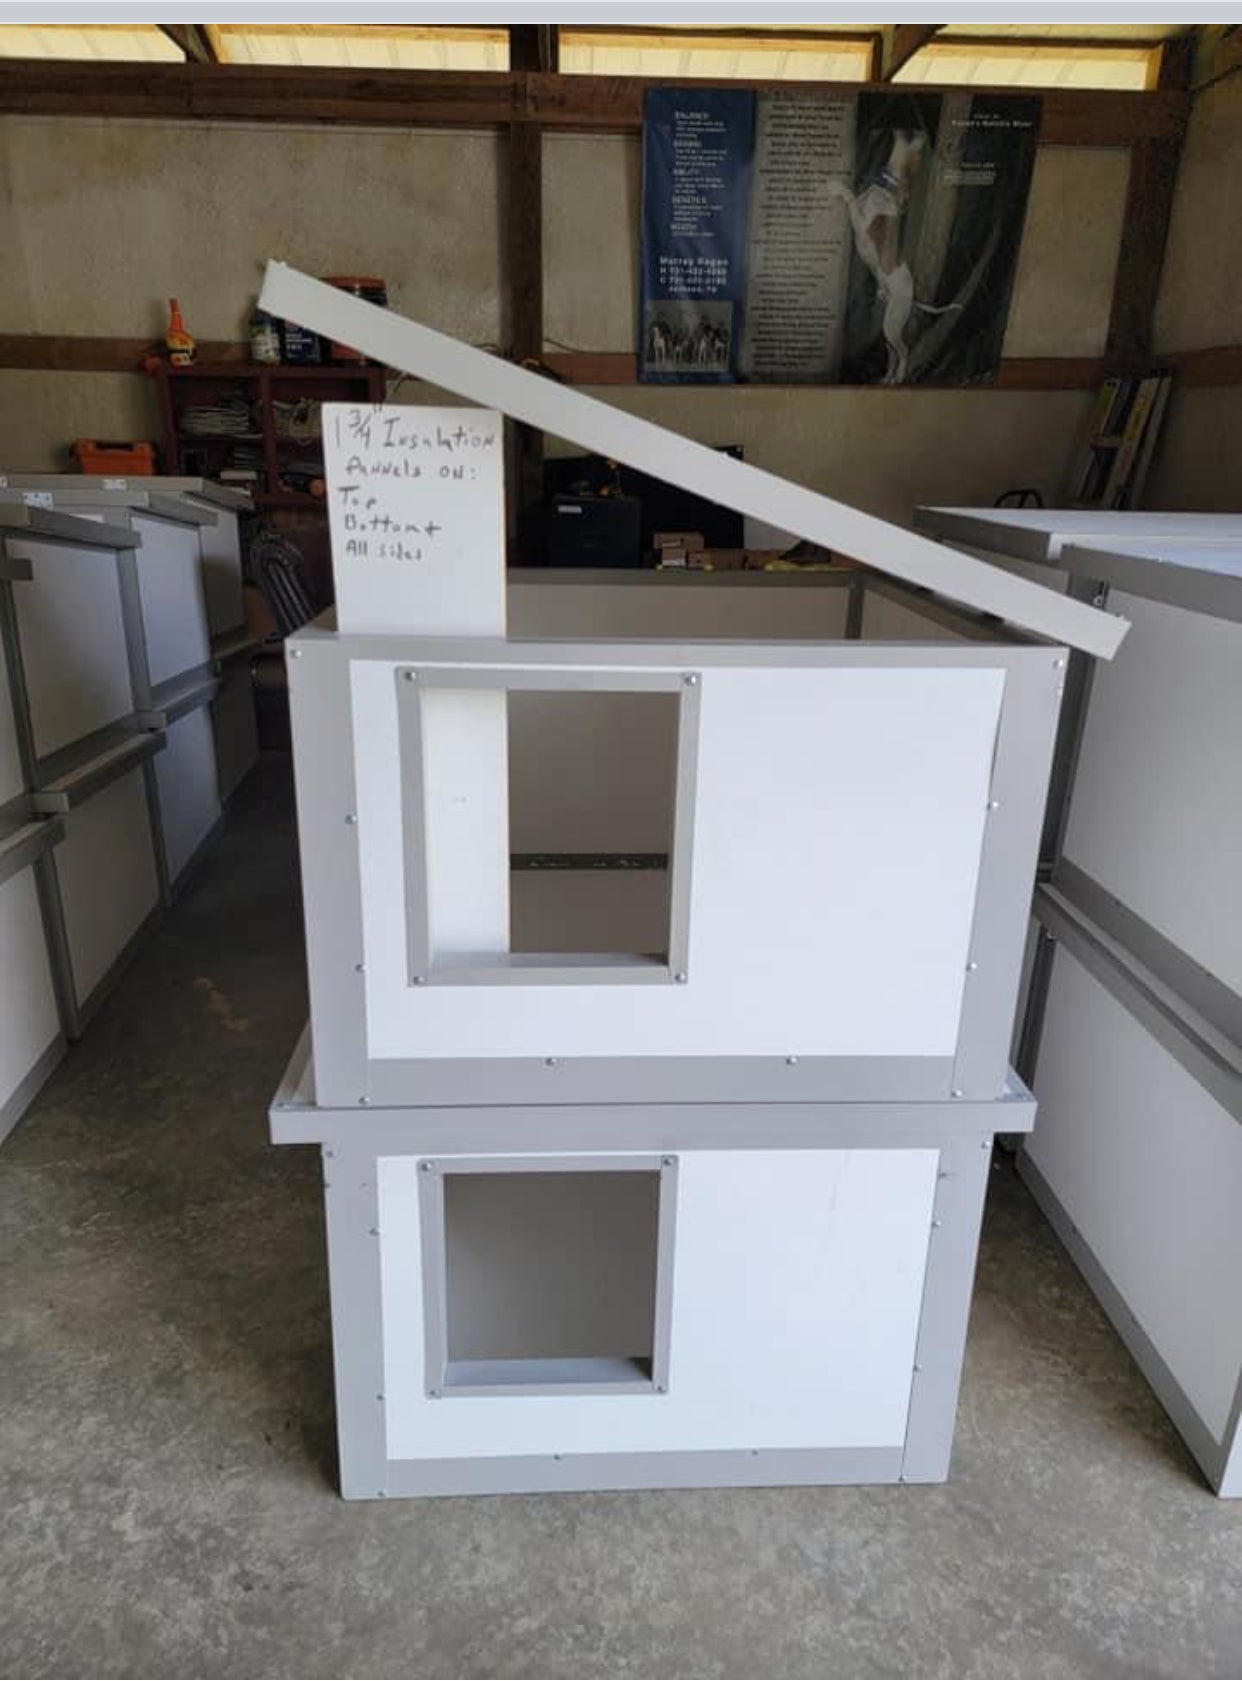 The white insulated Dog House